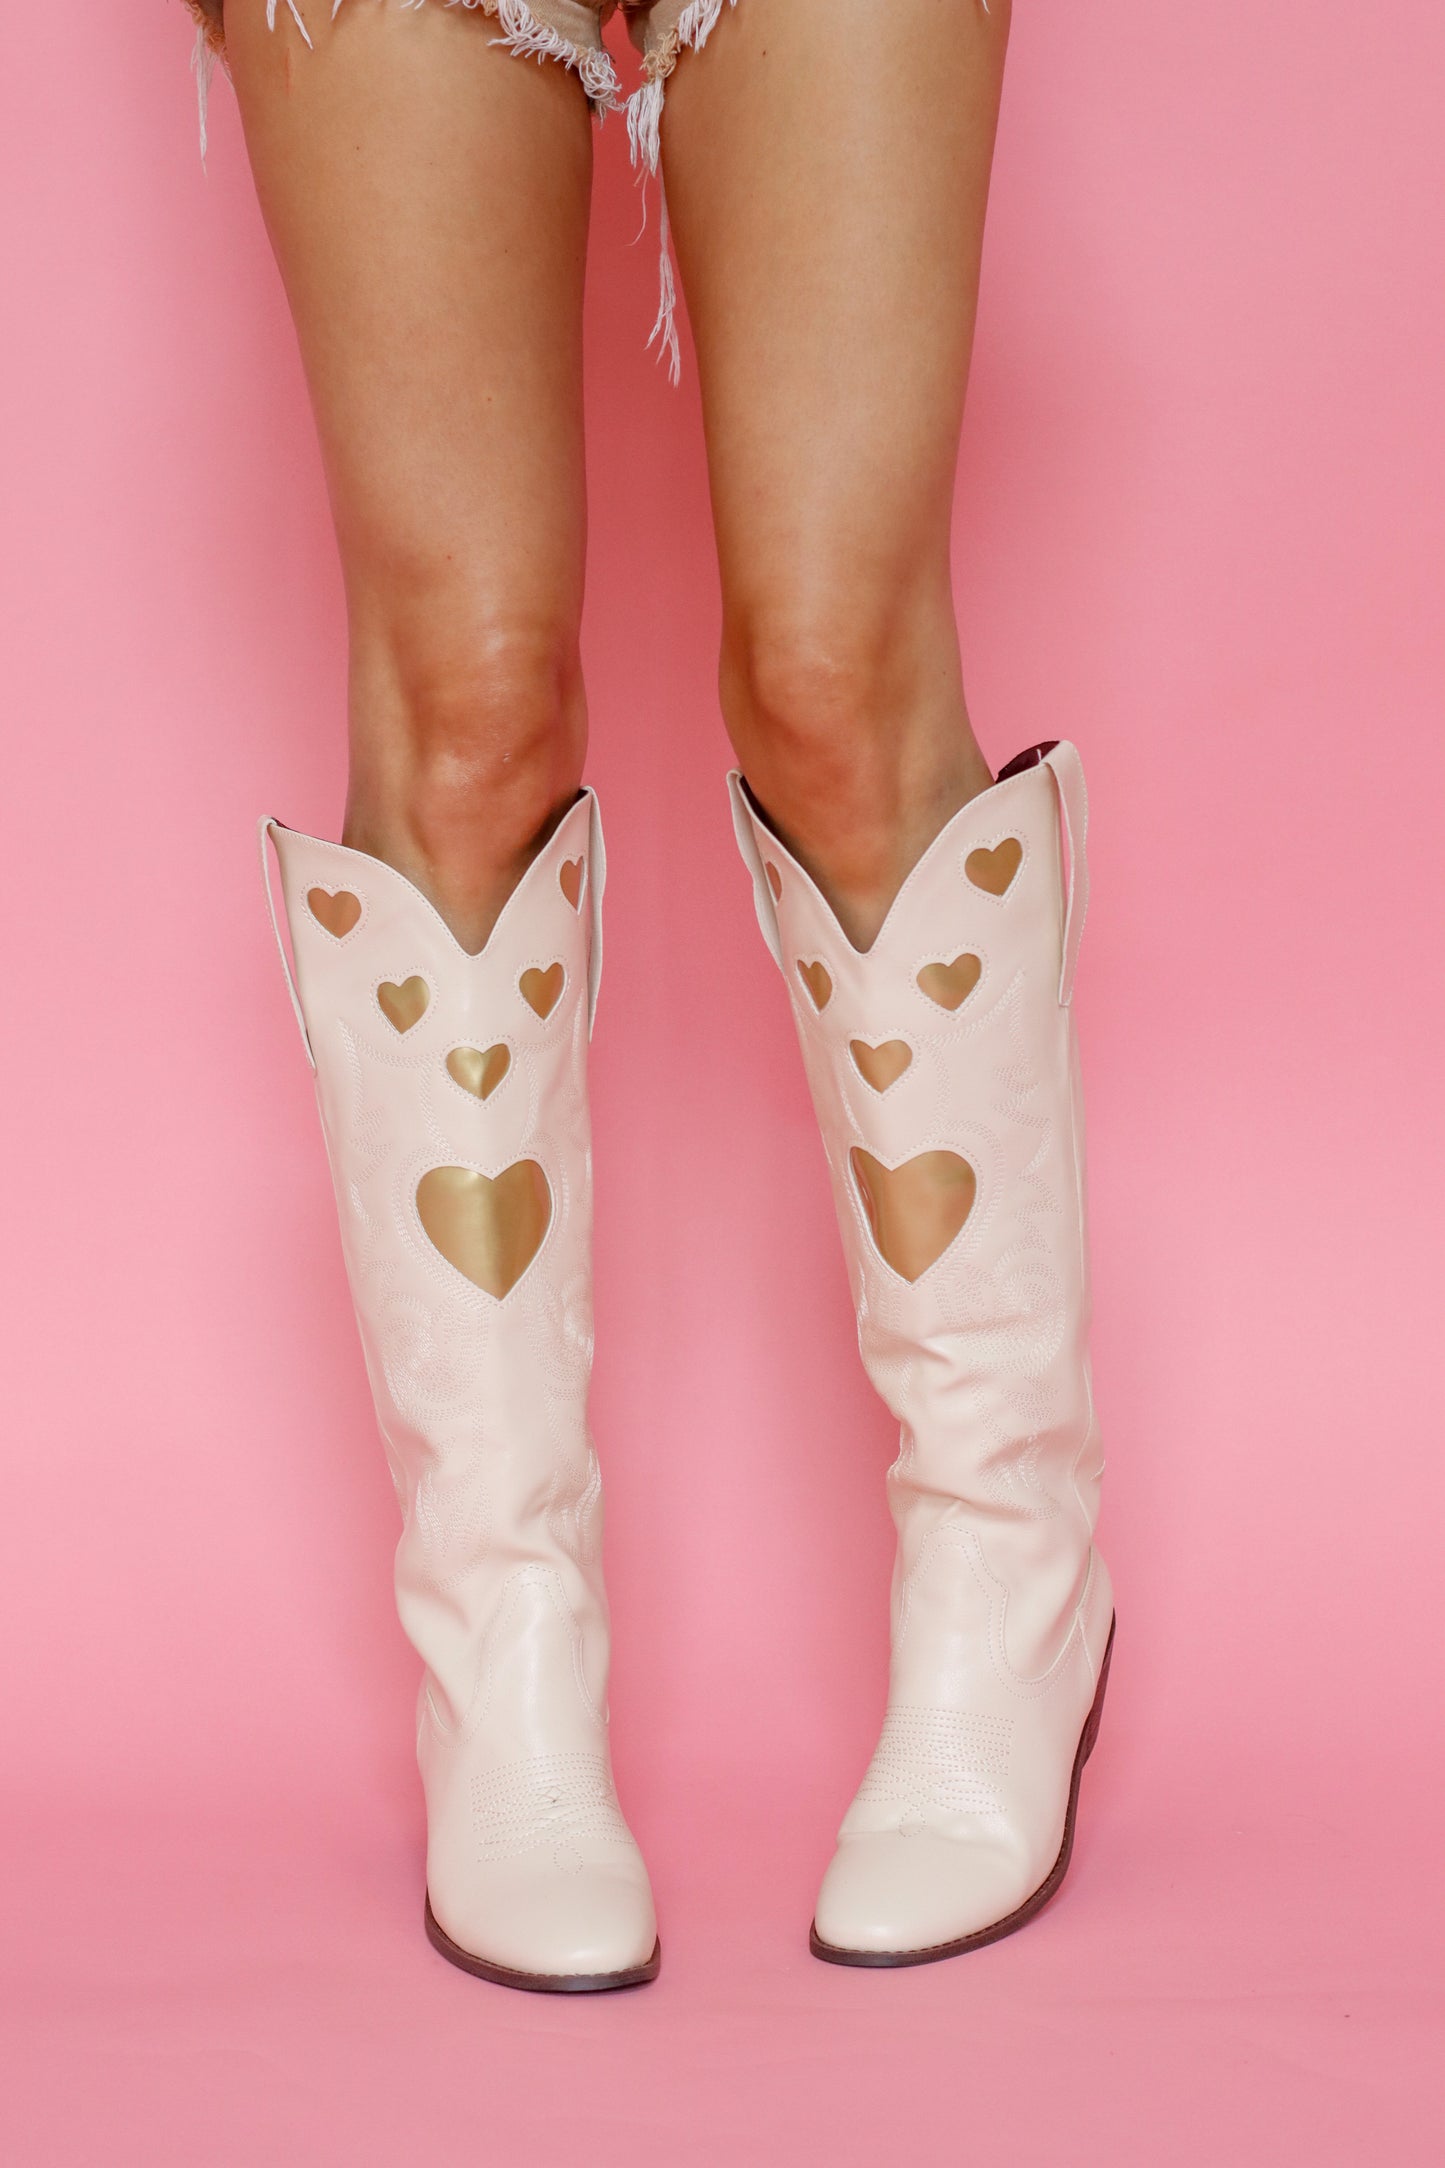 Lover Girl Cowgirl Boots Tans + Nudes